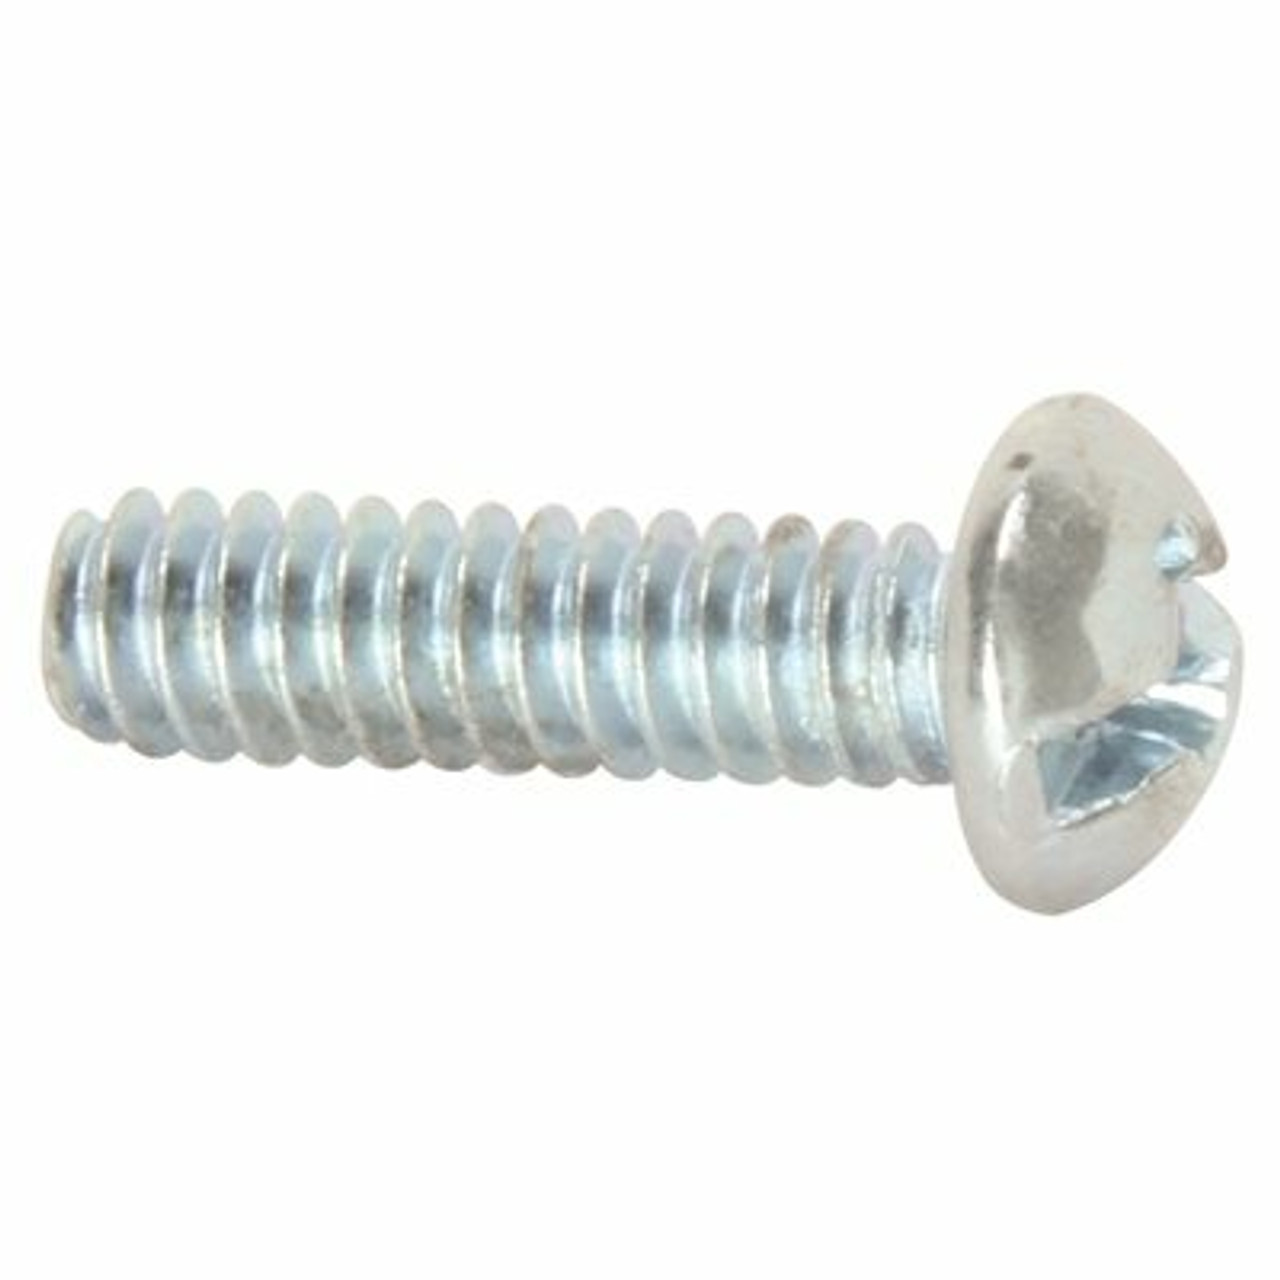 Lindstrom #8-32 Tpi X 1/2 In. Combo Phillips/Slotted Round Machine Screws (100 Per Pack)